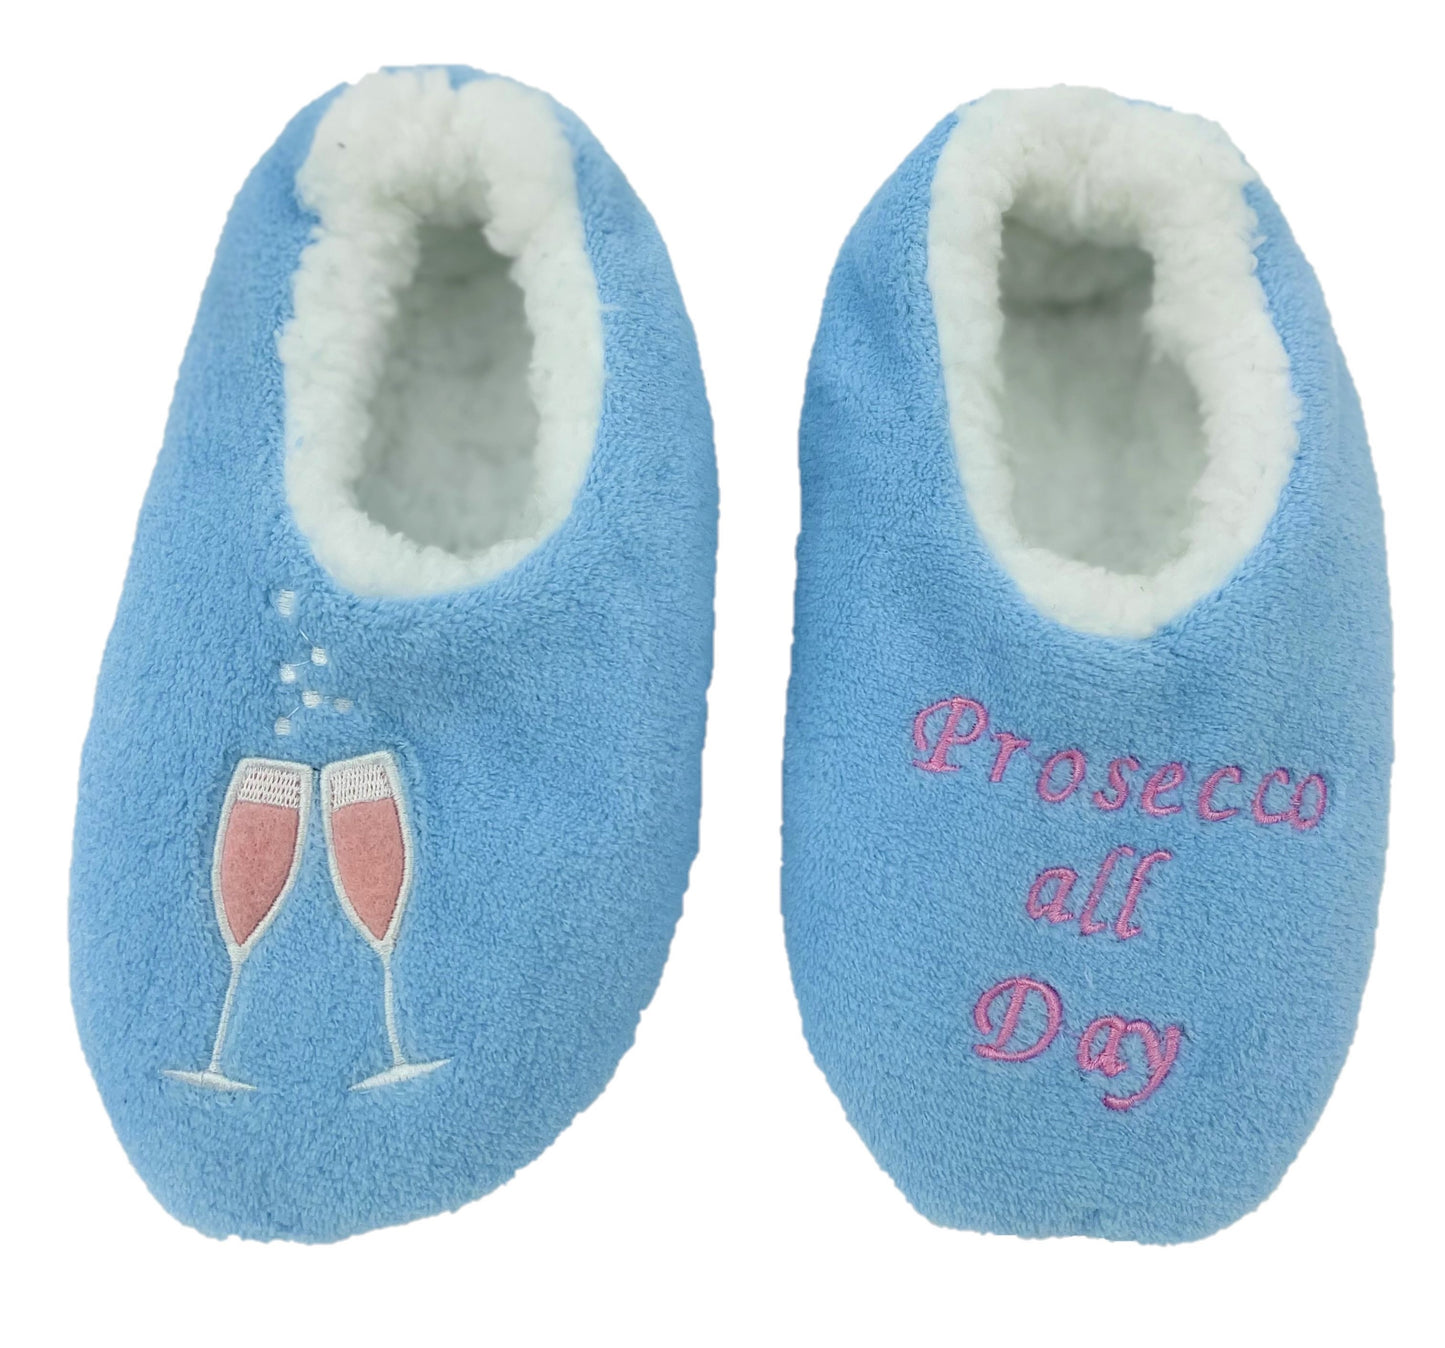 Ladies Slipper Sock with Motif - Blue Prosecco or Grey Martini 2 Sizes Available.